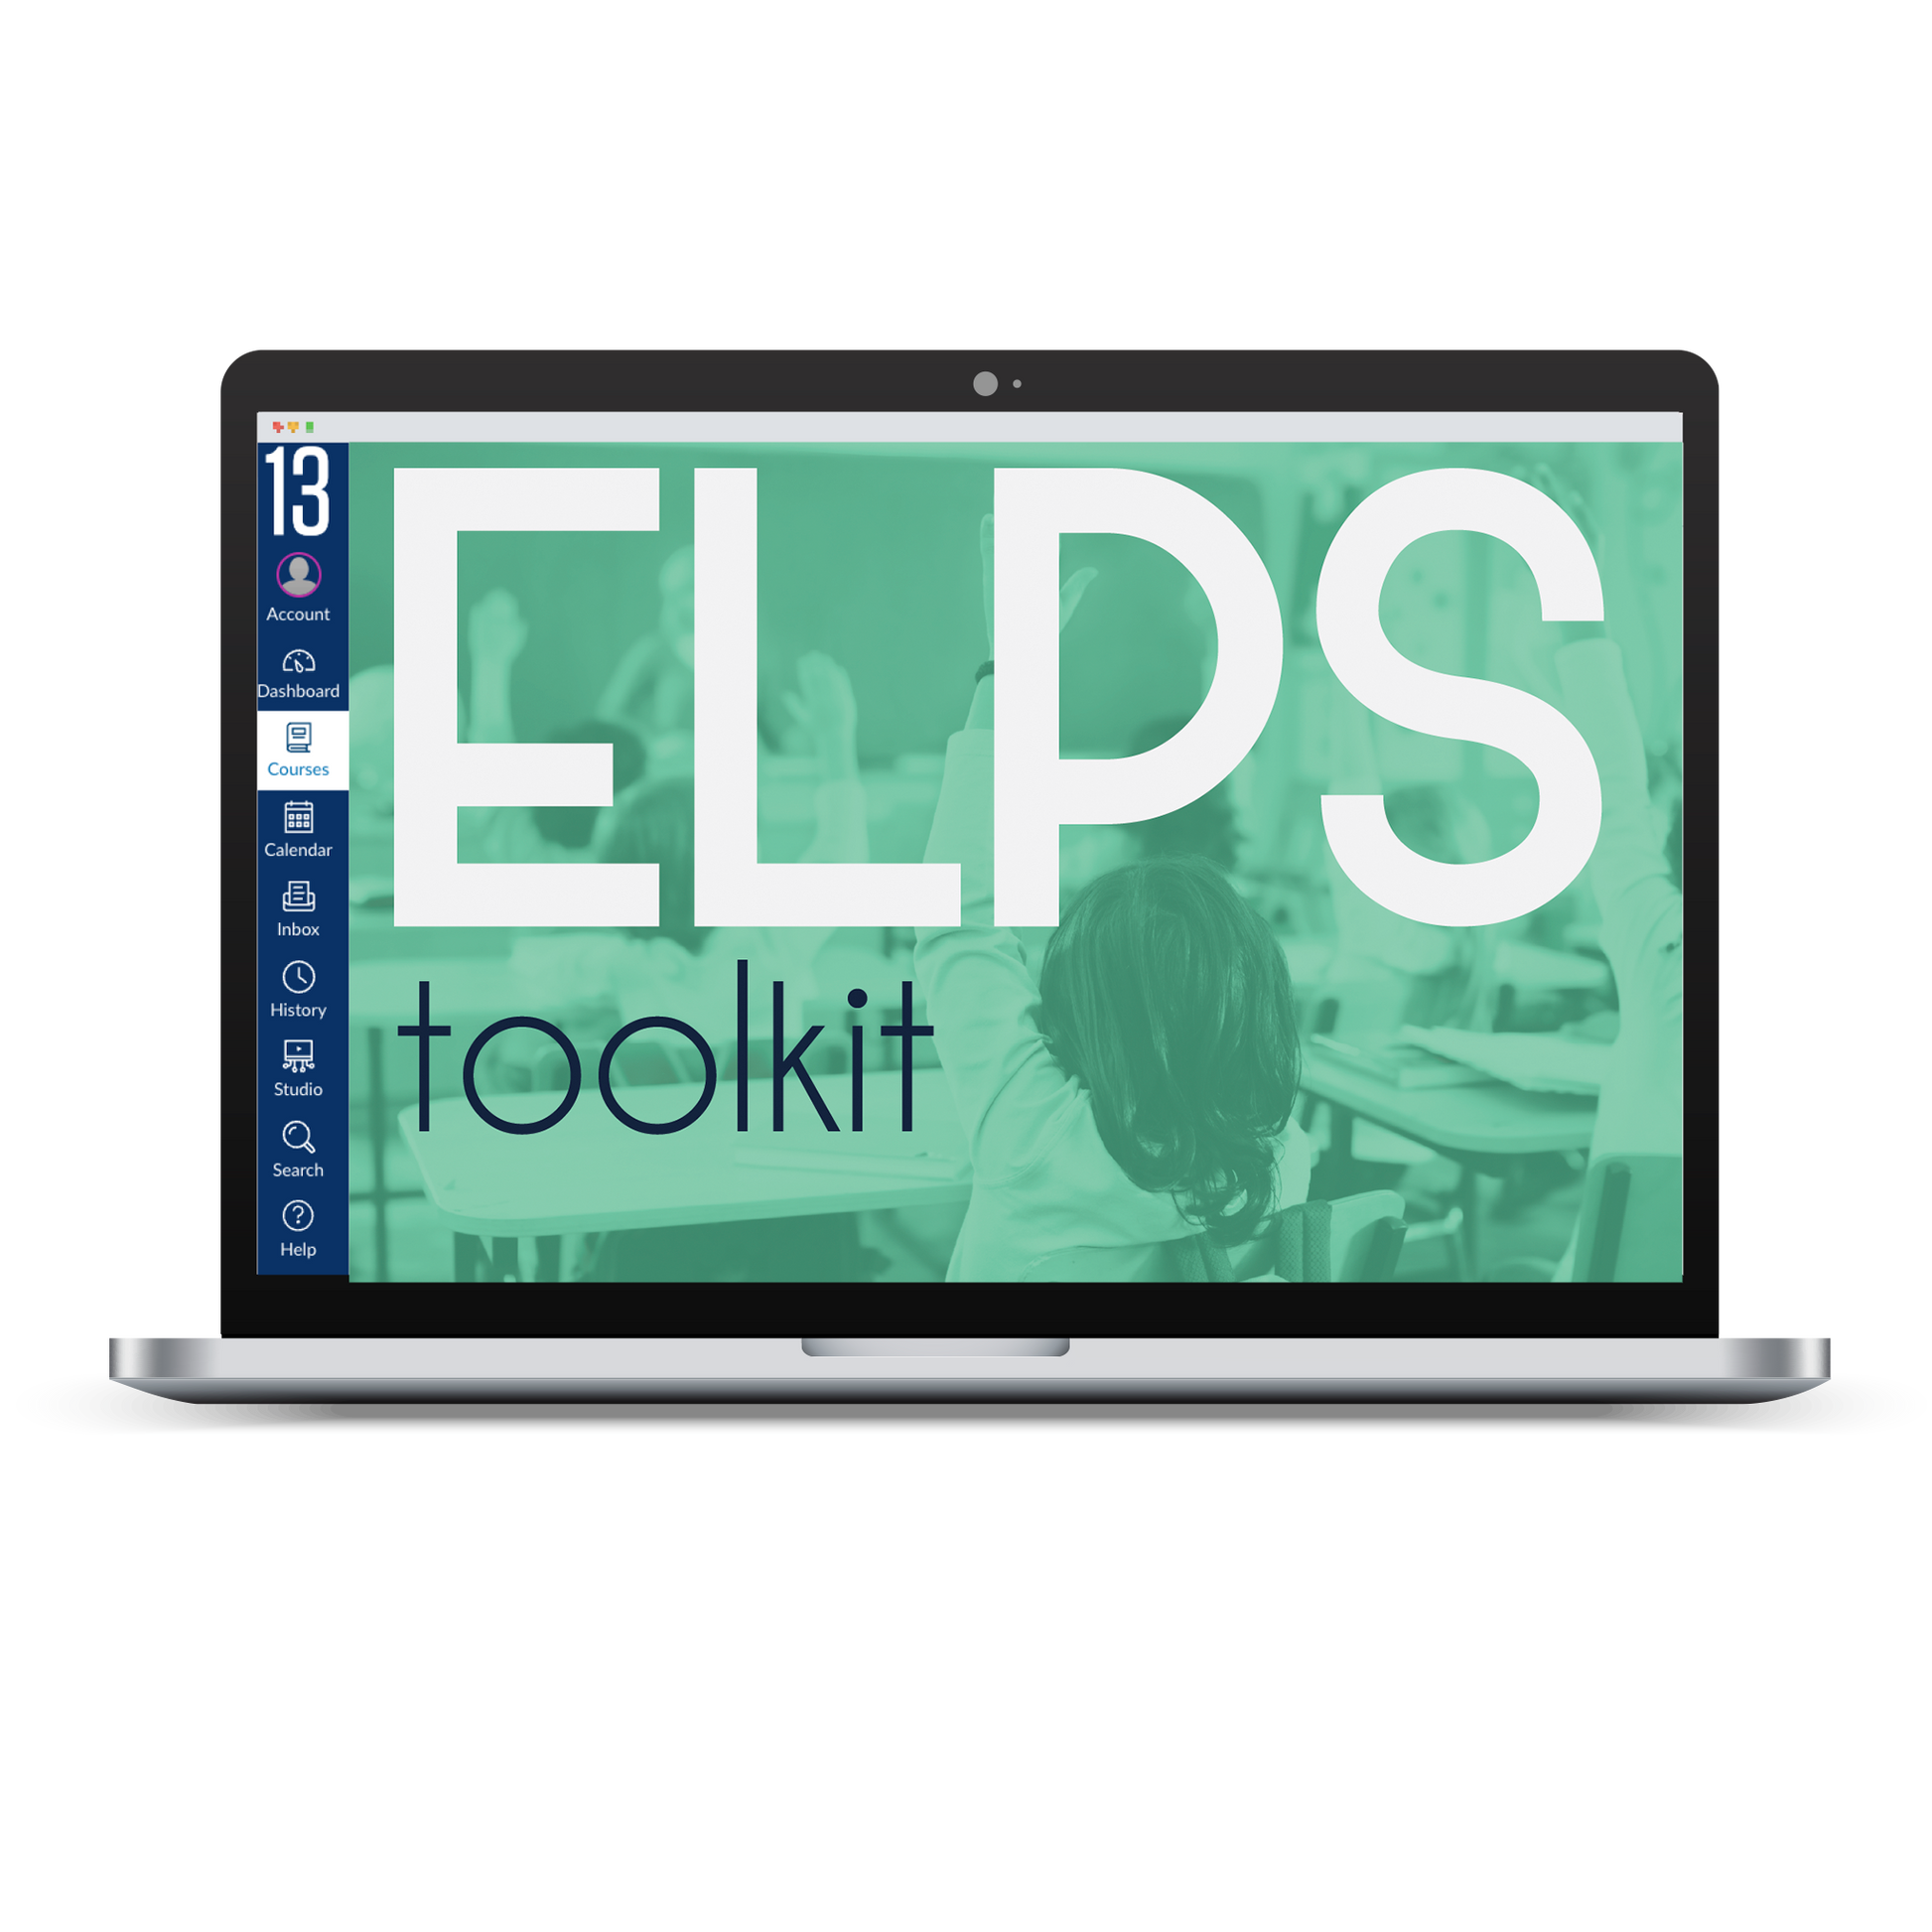 Laptop screen displaying a preview of the online course ELPS Toolkit  on the Canvas platform.